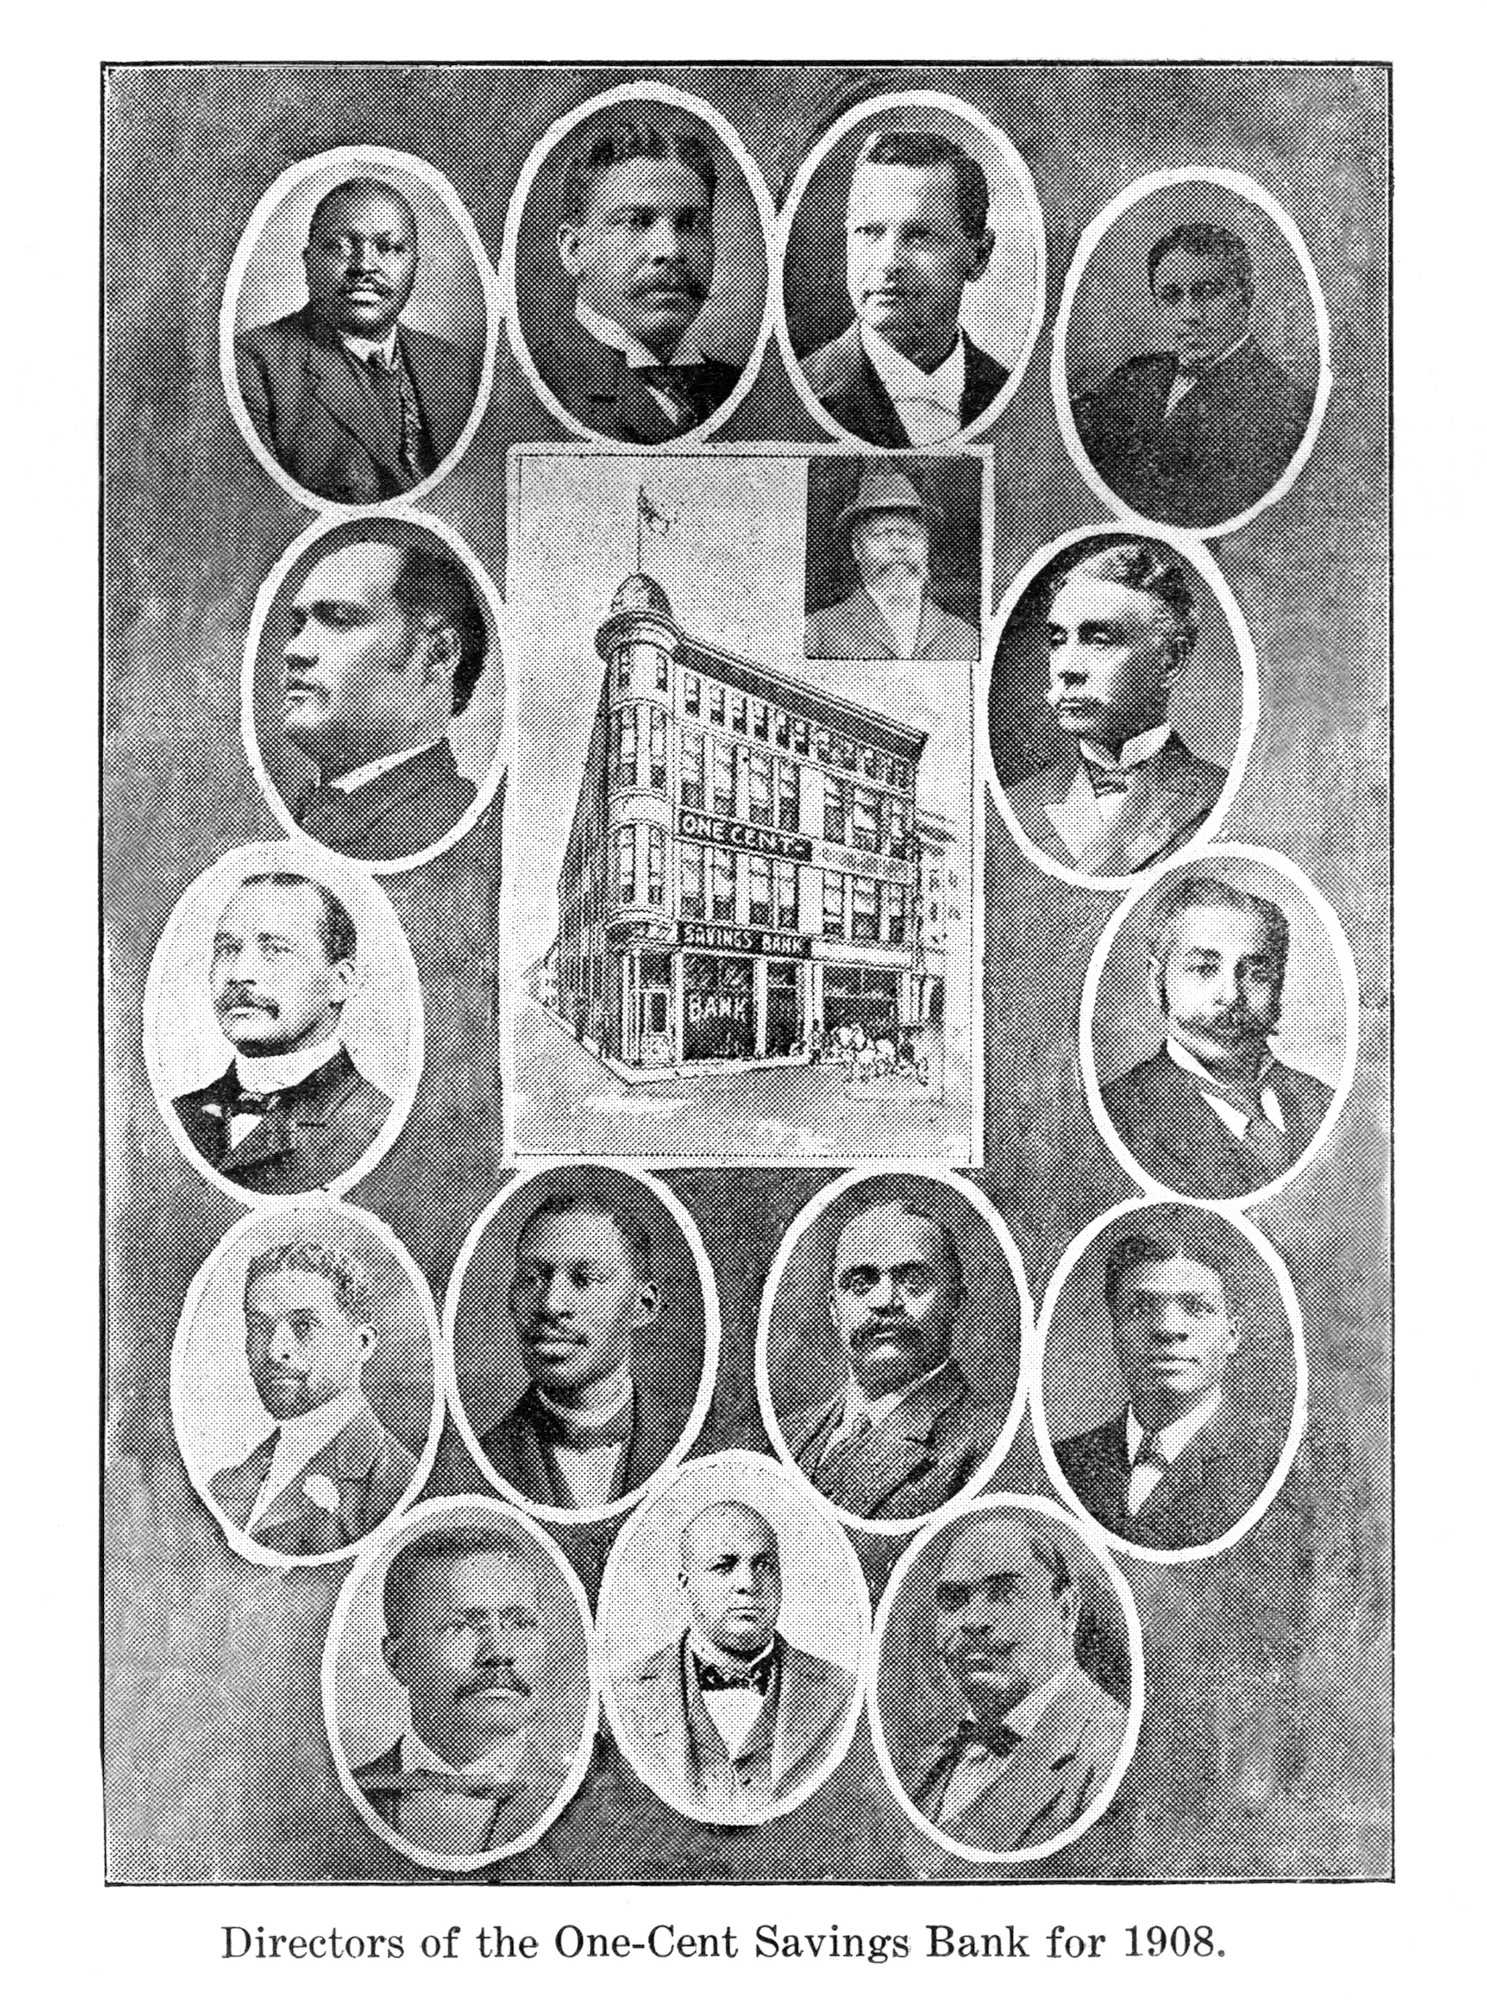 Composite of photographs showing the Board of Directors, One-Cent Savings Bank